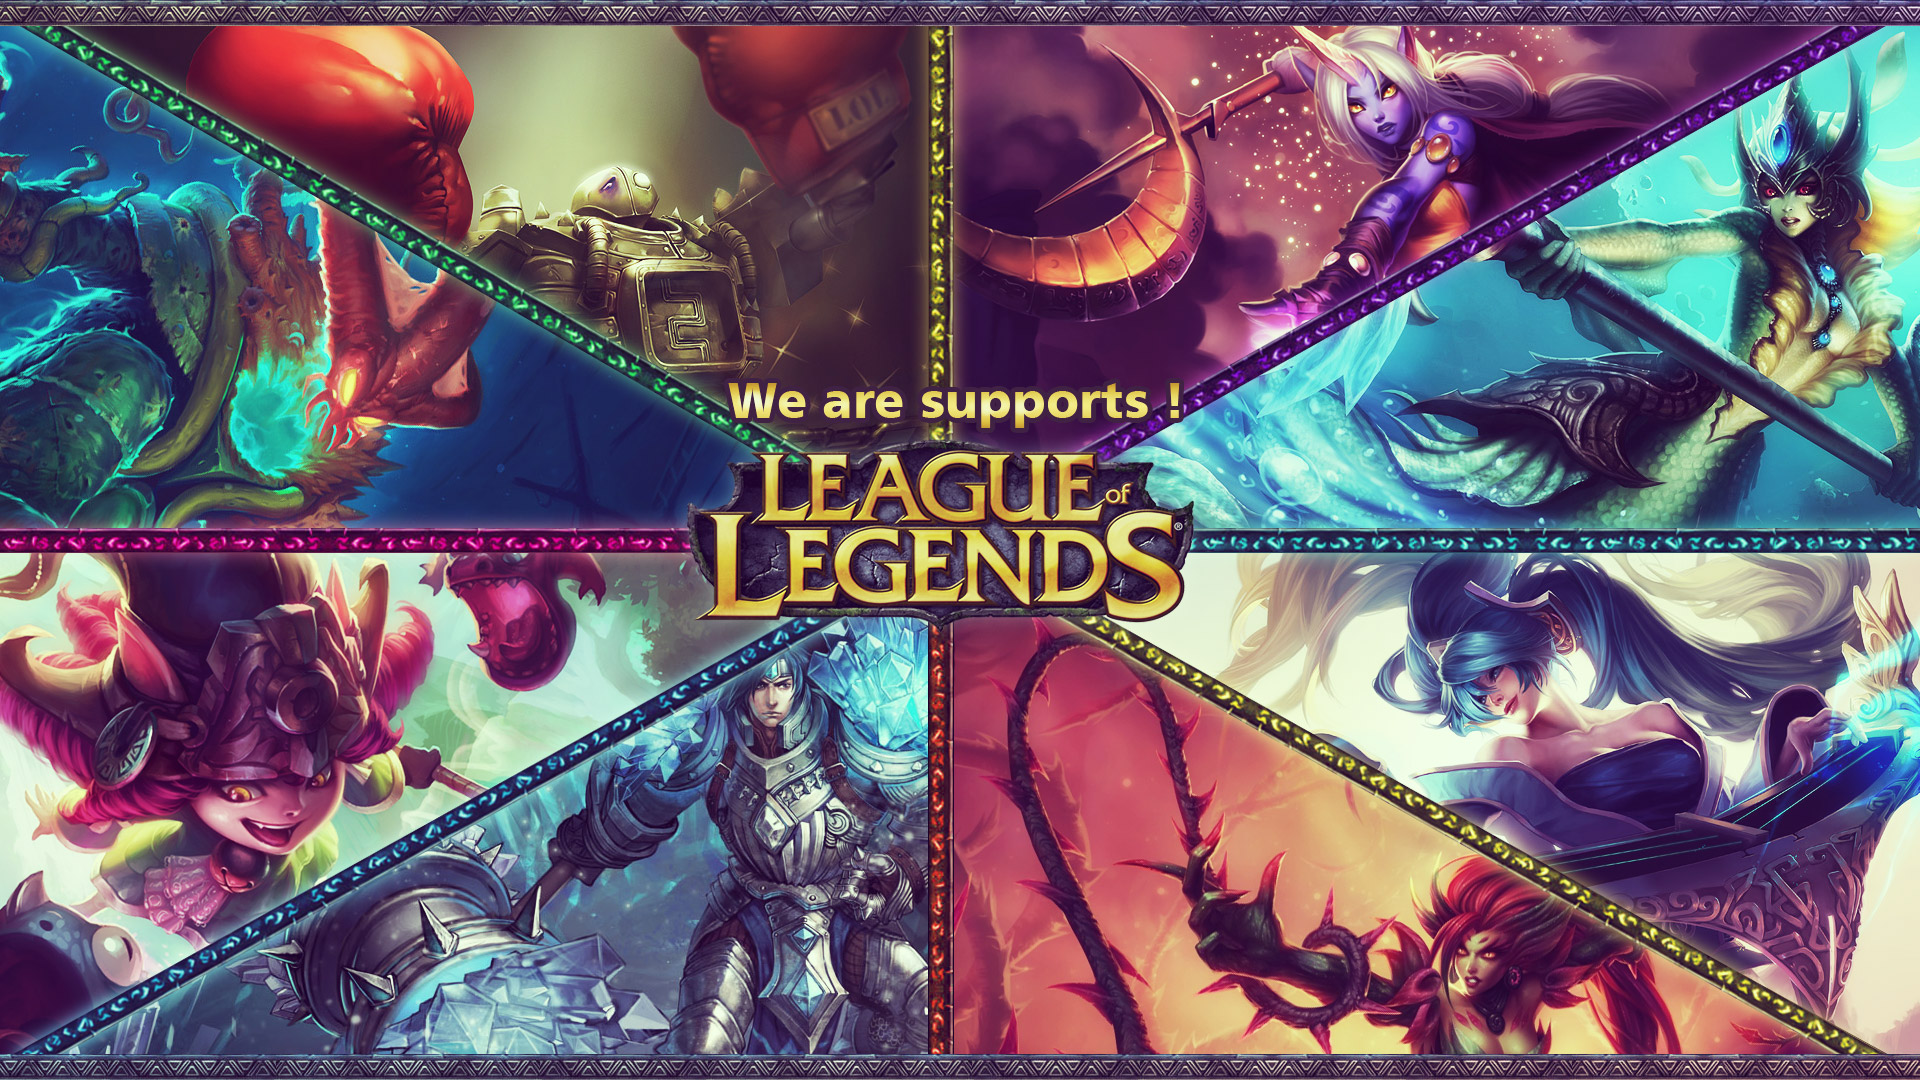 wallpapers video game, league of legends, blitzcrank (league of legends), lulu (league of legends), nami (league of legends), sona (league of legends), soraka (league of legends), taric (league of legends), thresh (league of legends), zyra (league of legends)